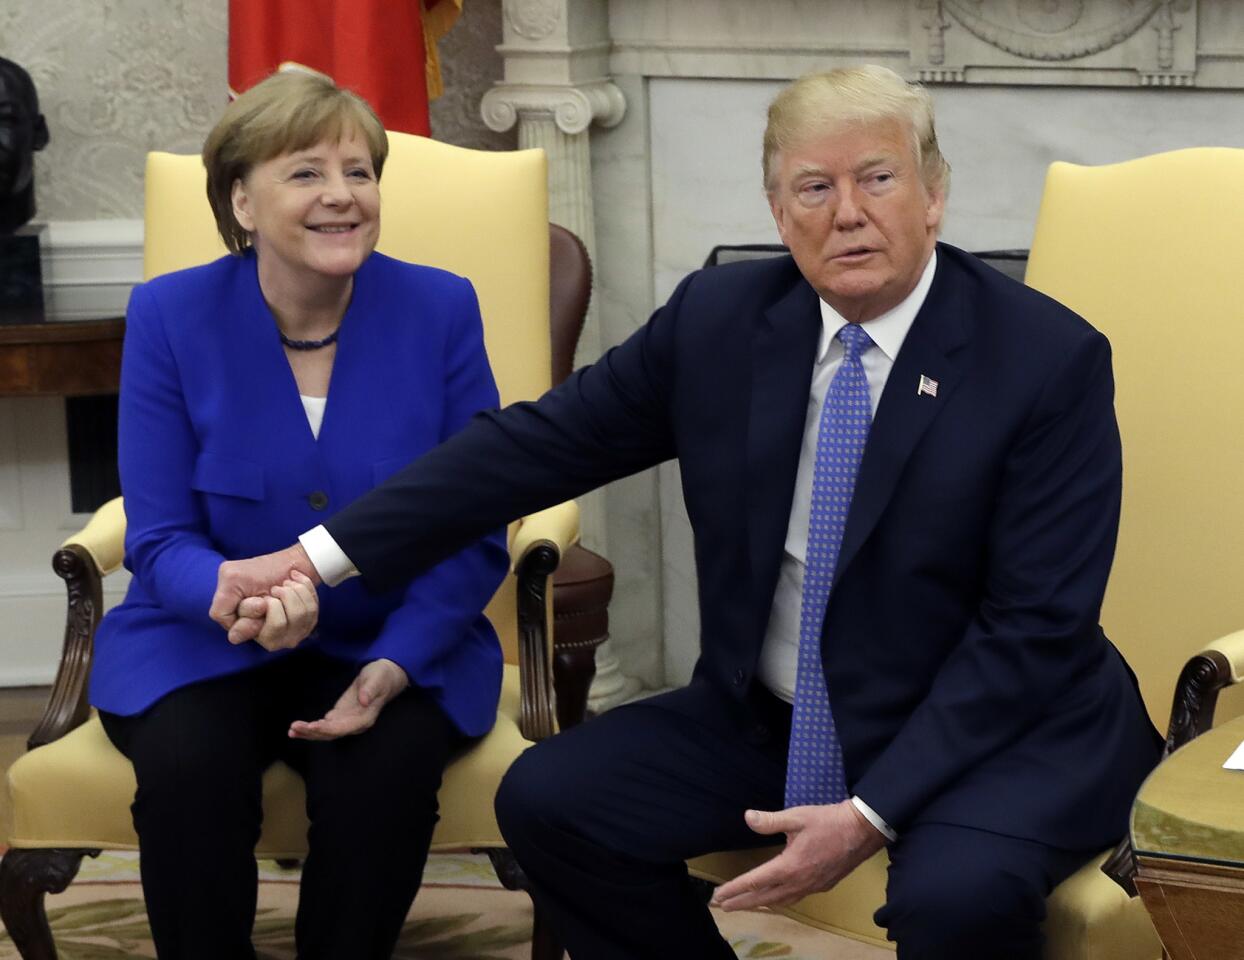 President Donald Trump meets with German Chancellor Angela Merkel in the Oval Office of the White House on April 27, 2018, in Washington.